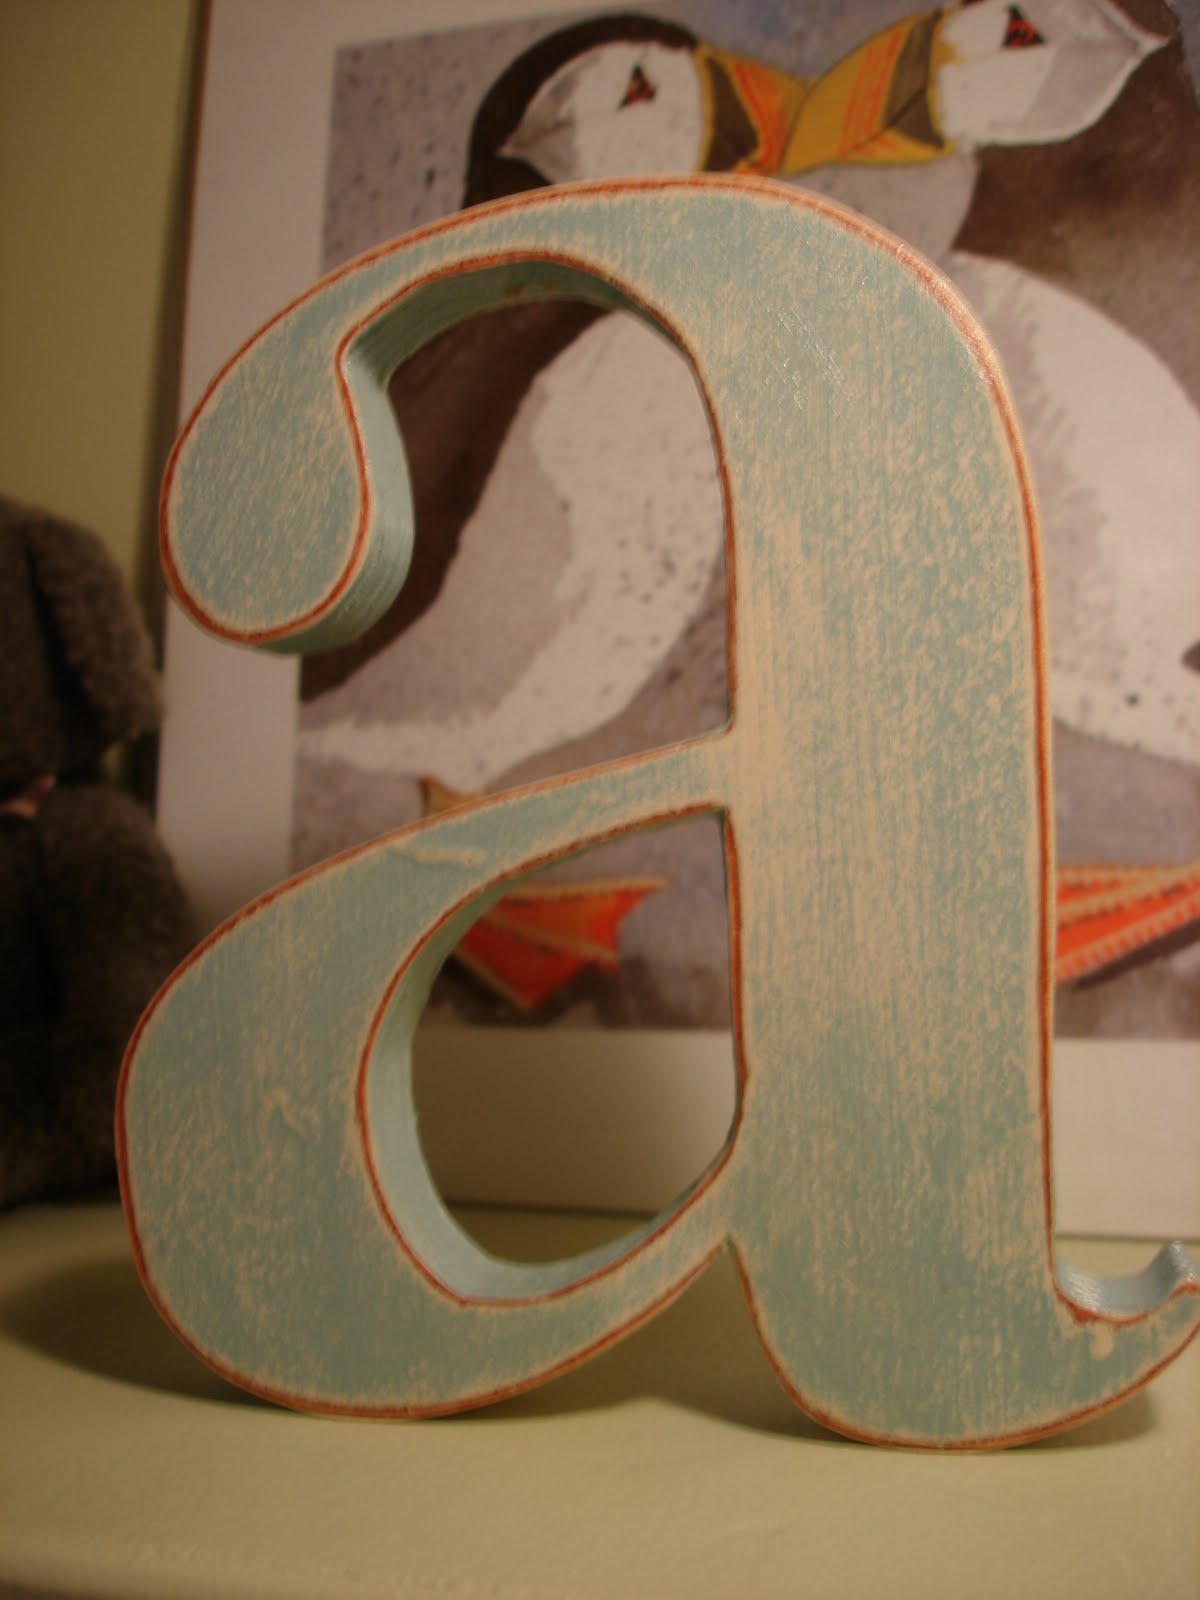 Patent Pending Projects Shop: Childrens Wooden Letters